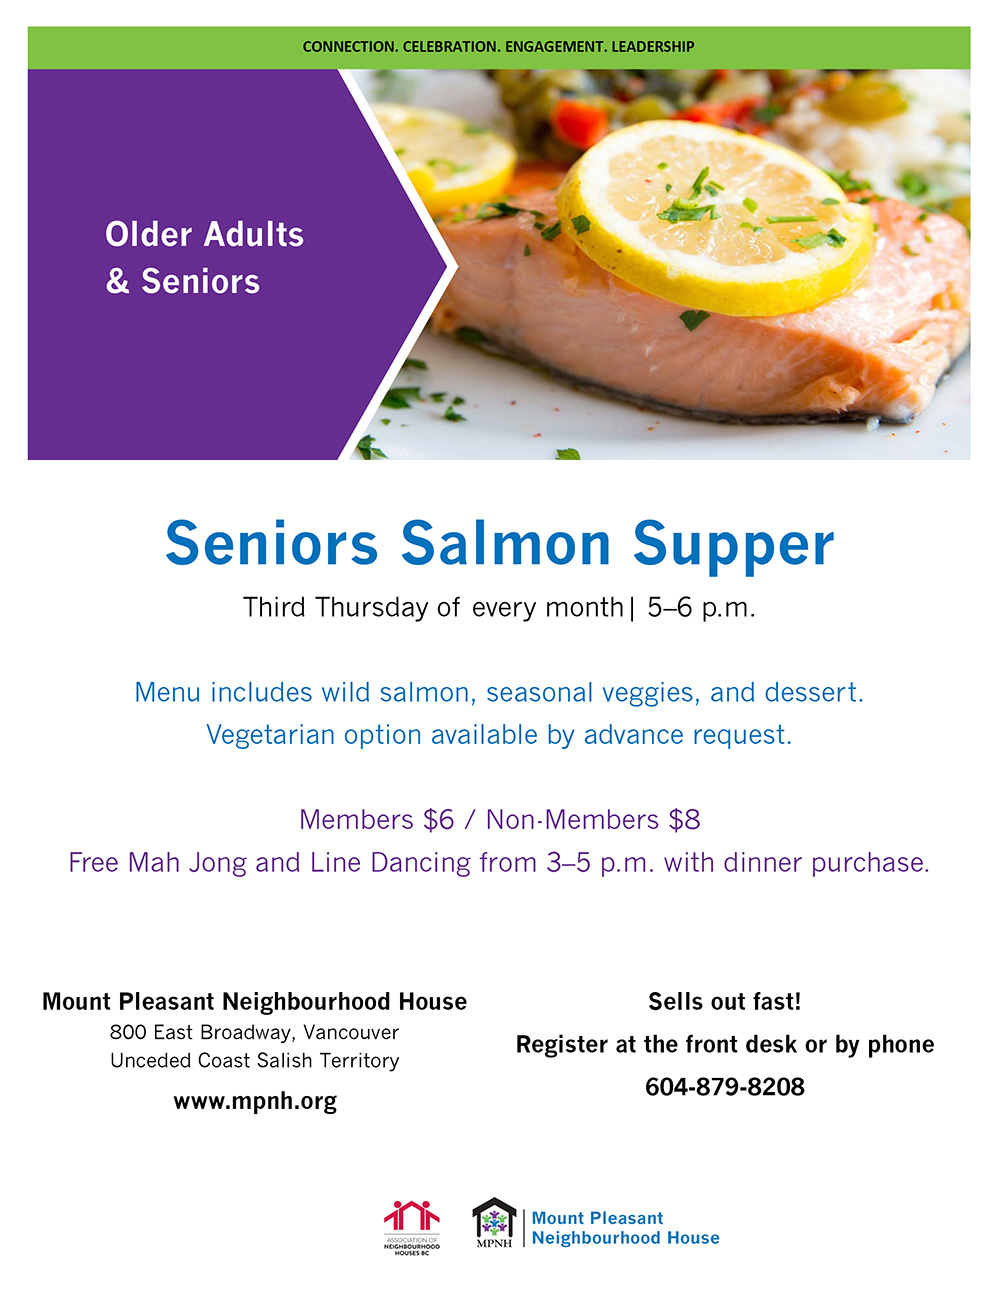 A poster for the Seniors Salmon Supper showing a delicious piece of salmon with some lemon garnish